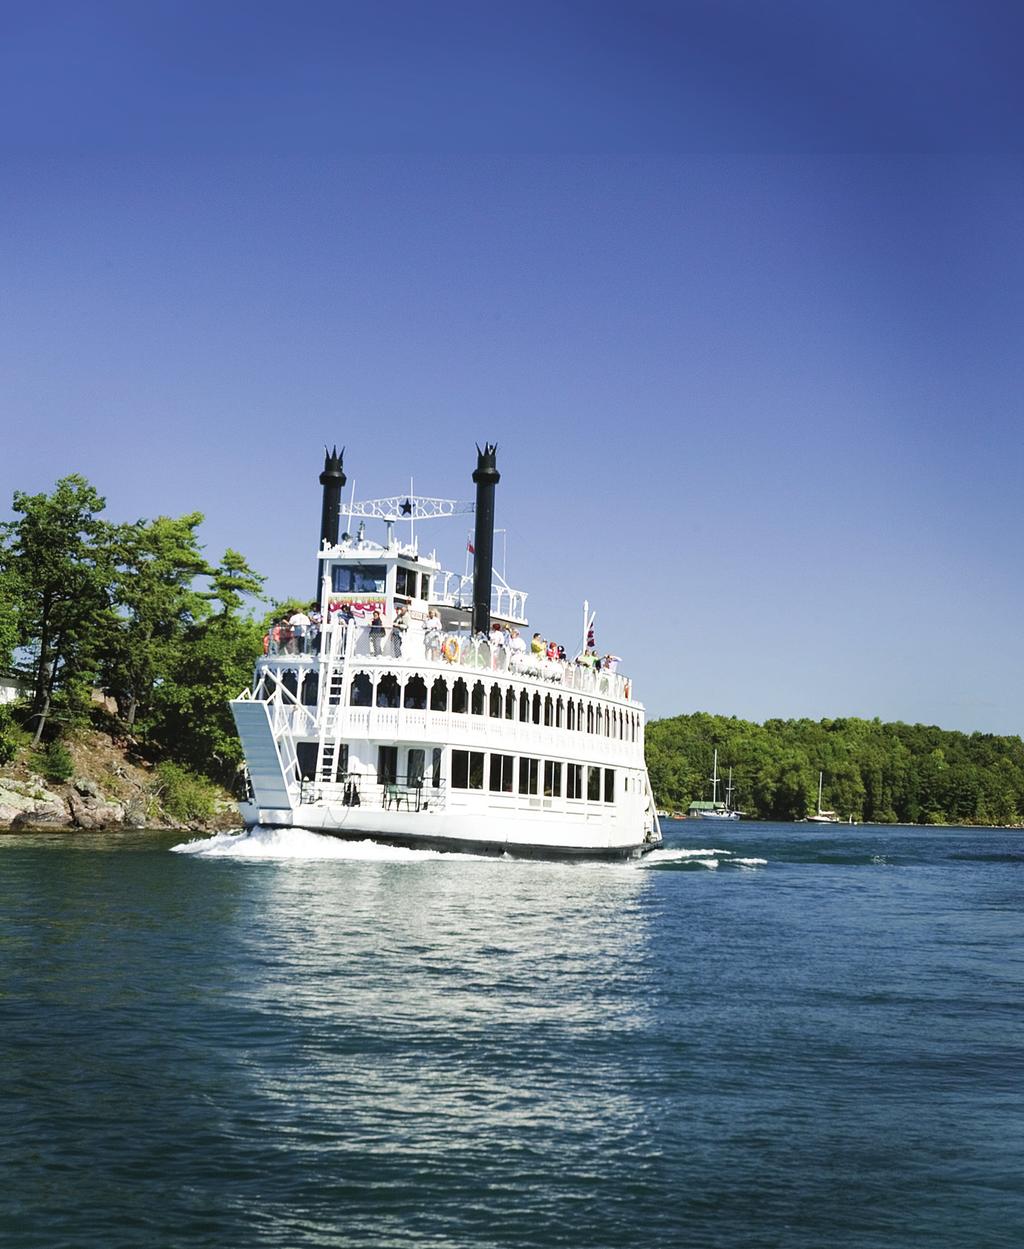 The Island Queen Rollin Down the River The world-famous 1000 Islands begin in Kingston and span the St.